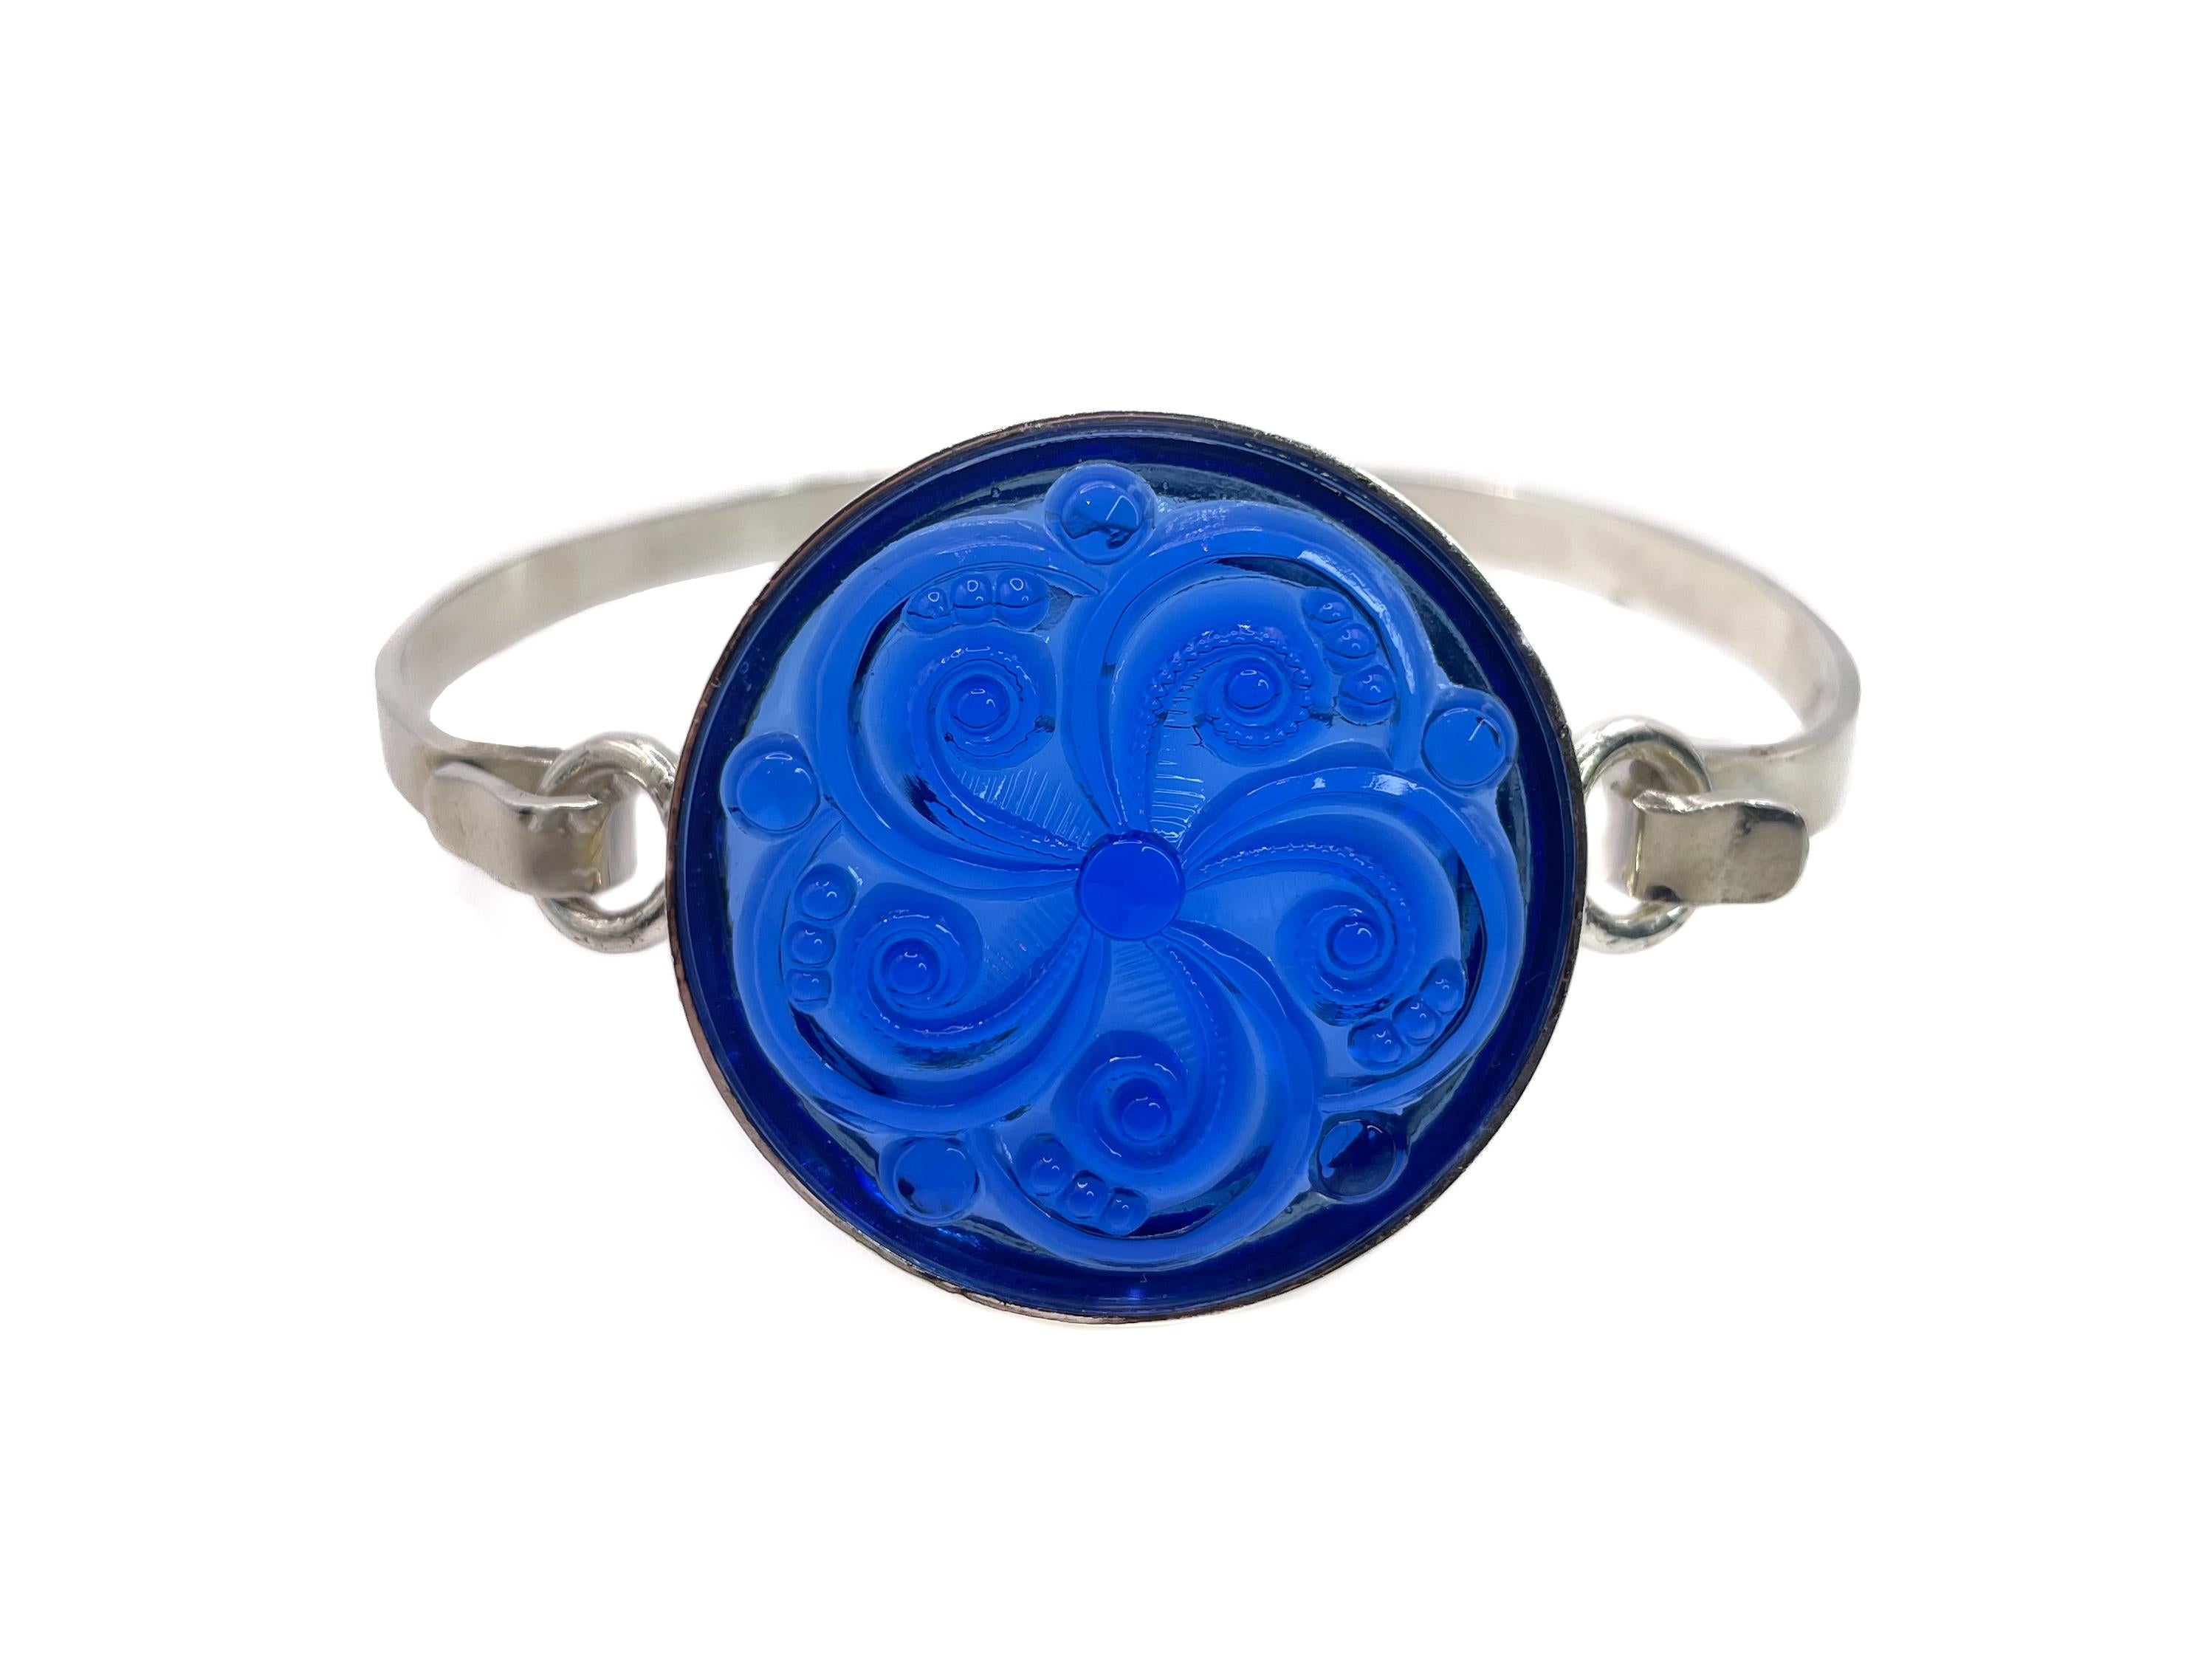 This refined bracelet, in the style of Lalique, showcases a sapphire swirl motif glass cabochon from Germany. 

The round molded piece of glass is set in a NEW sterling silver setting. It has an elegant and effortless hook clasp. The glass stone